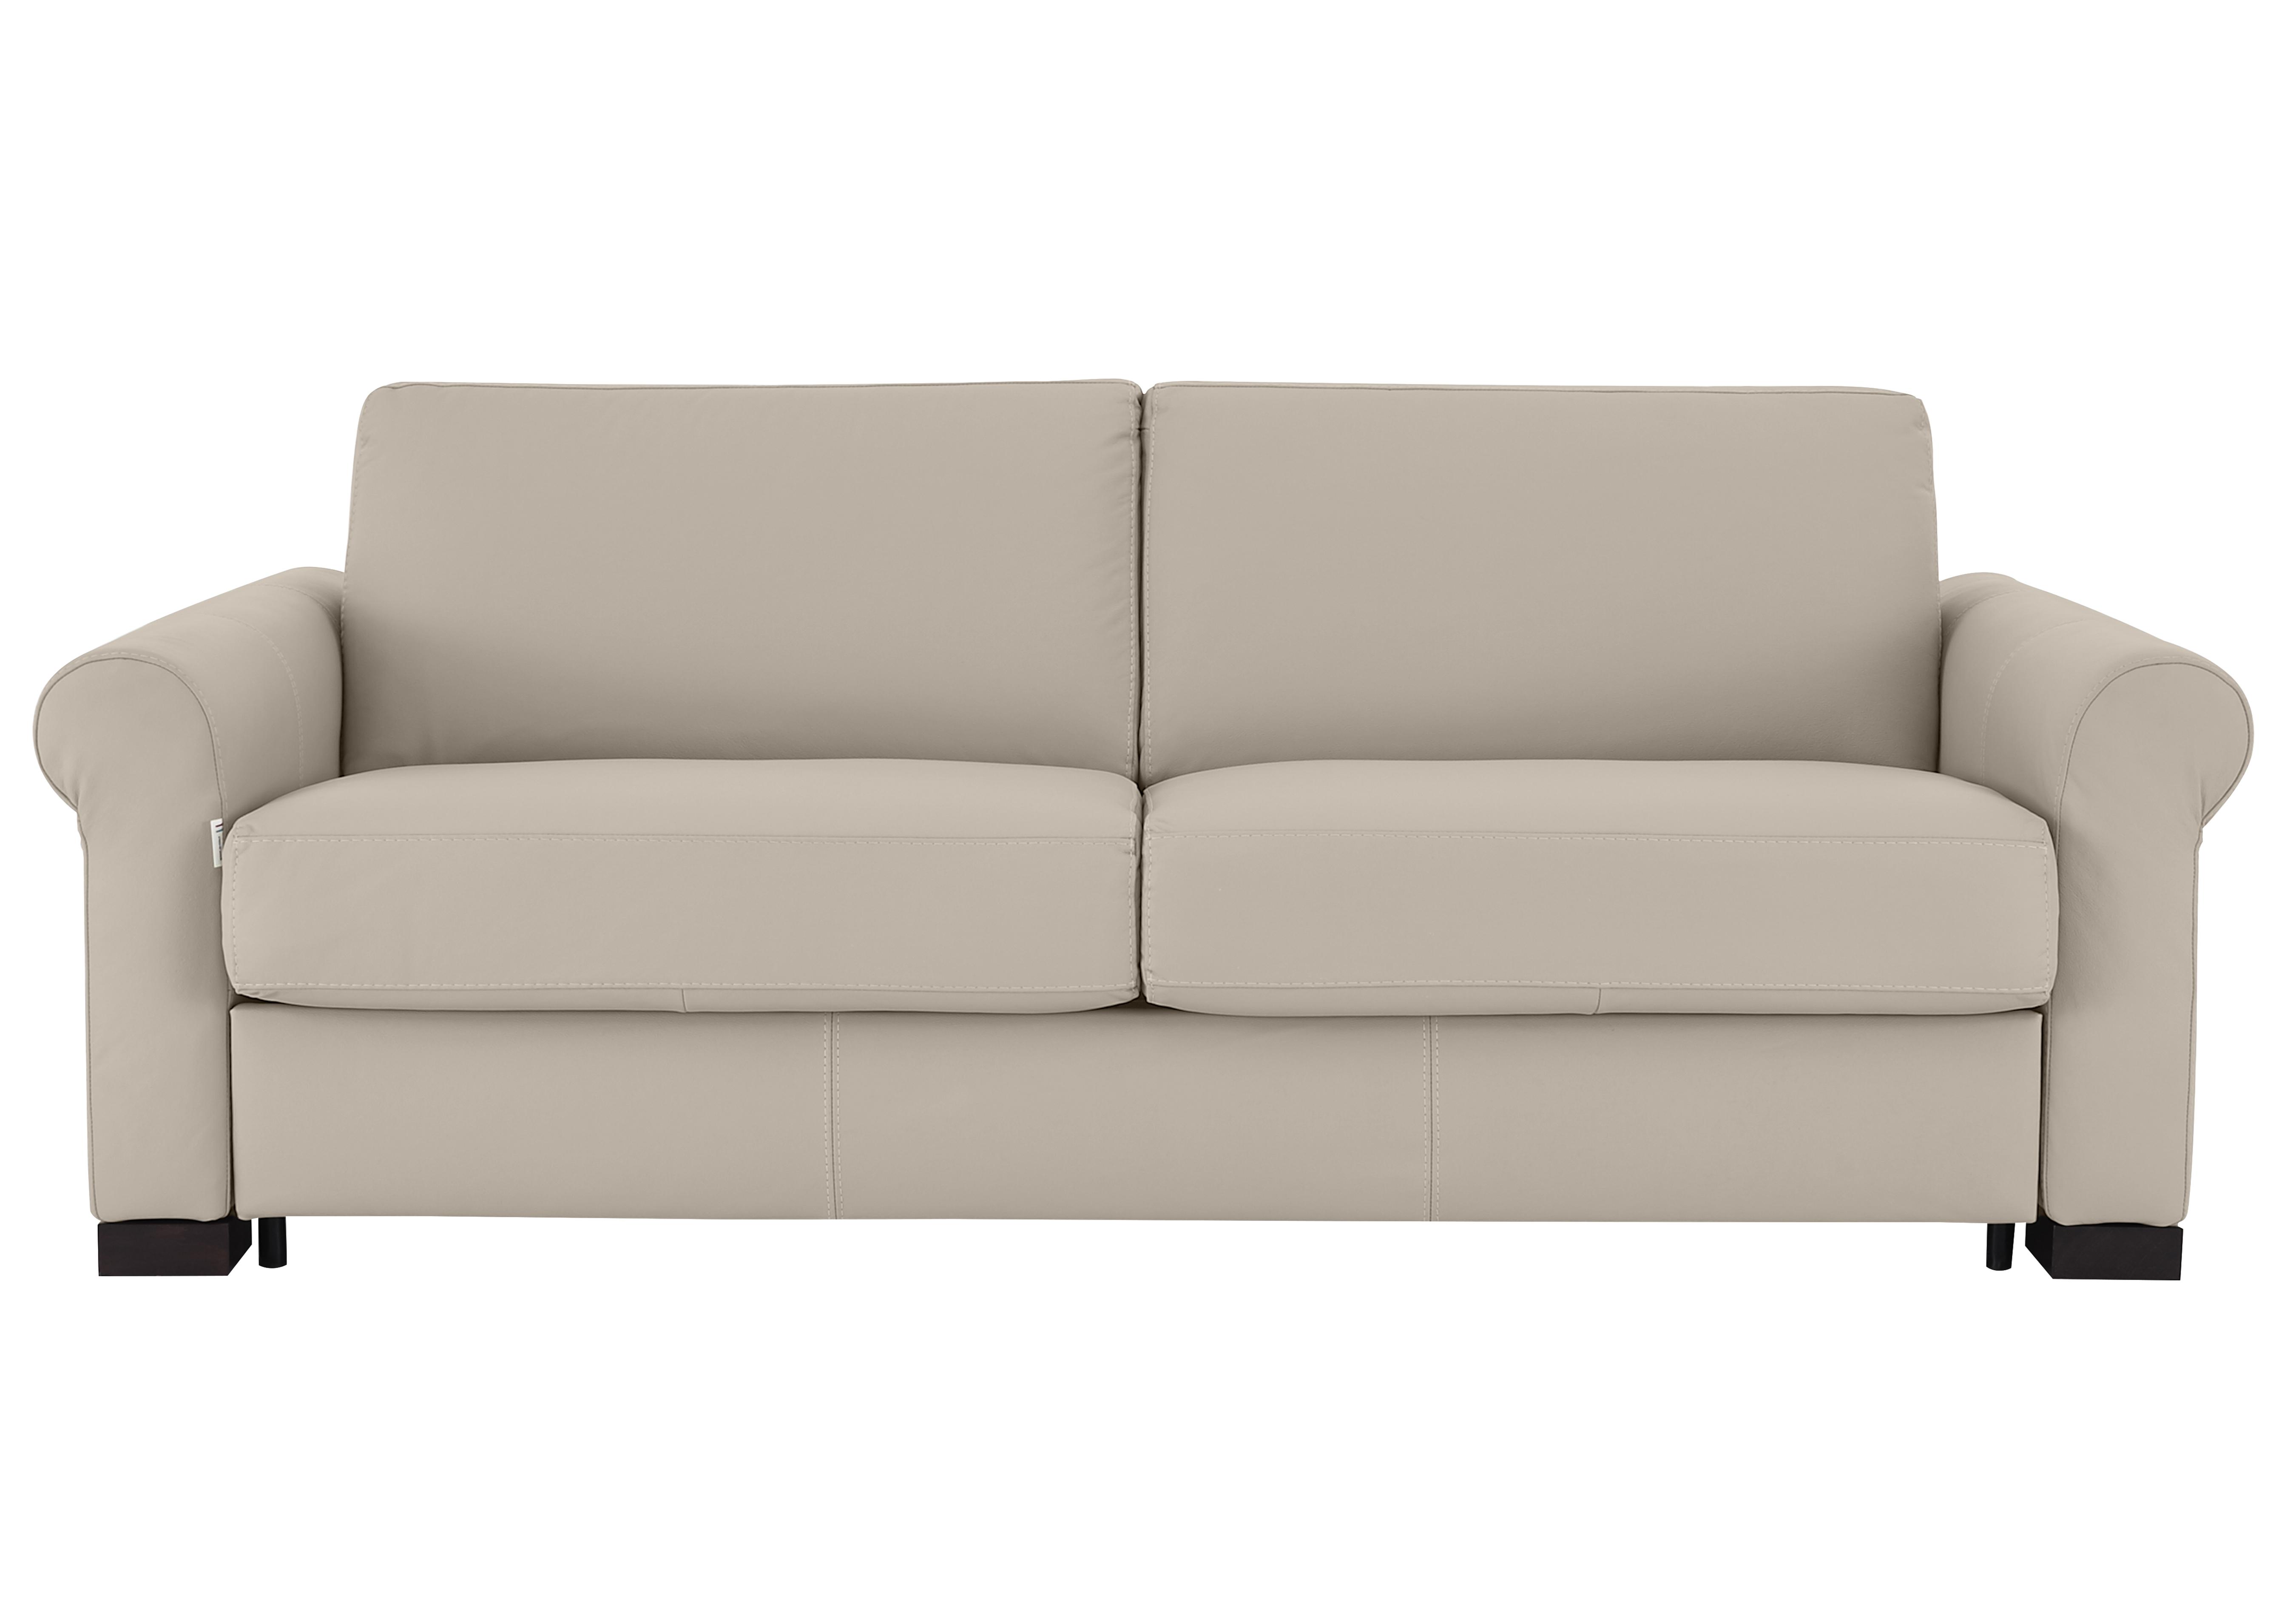 Alcova 3 Seater Leather Sofa Bed with Scroll Arms in Botero Crema 2156 on Furniture Village